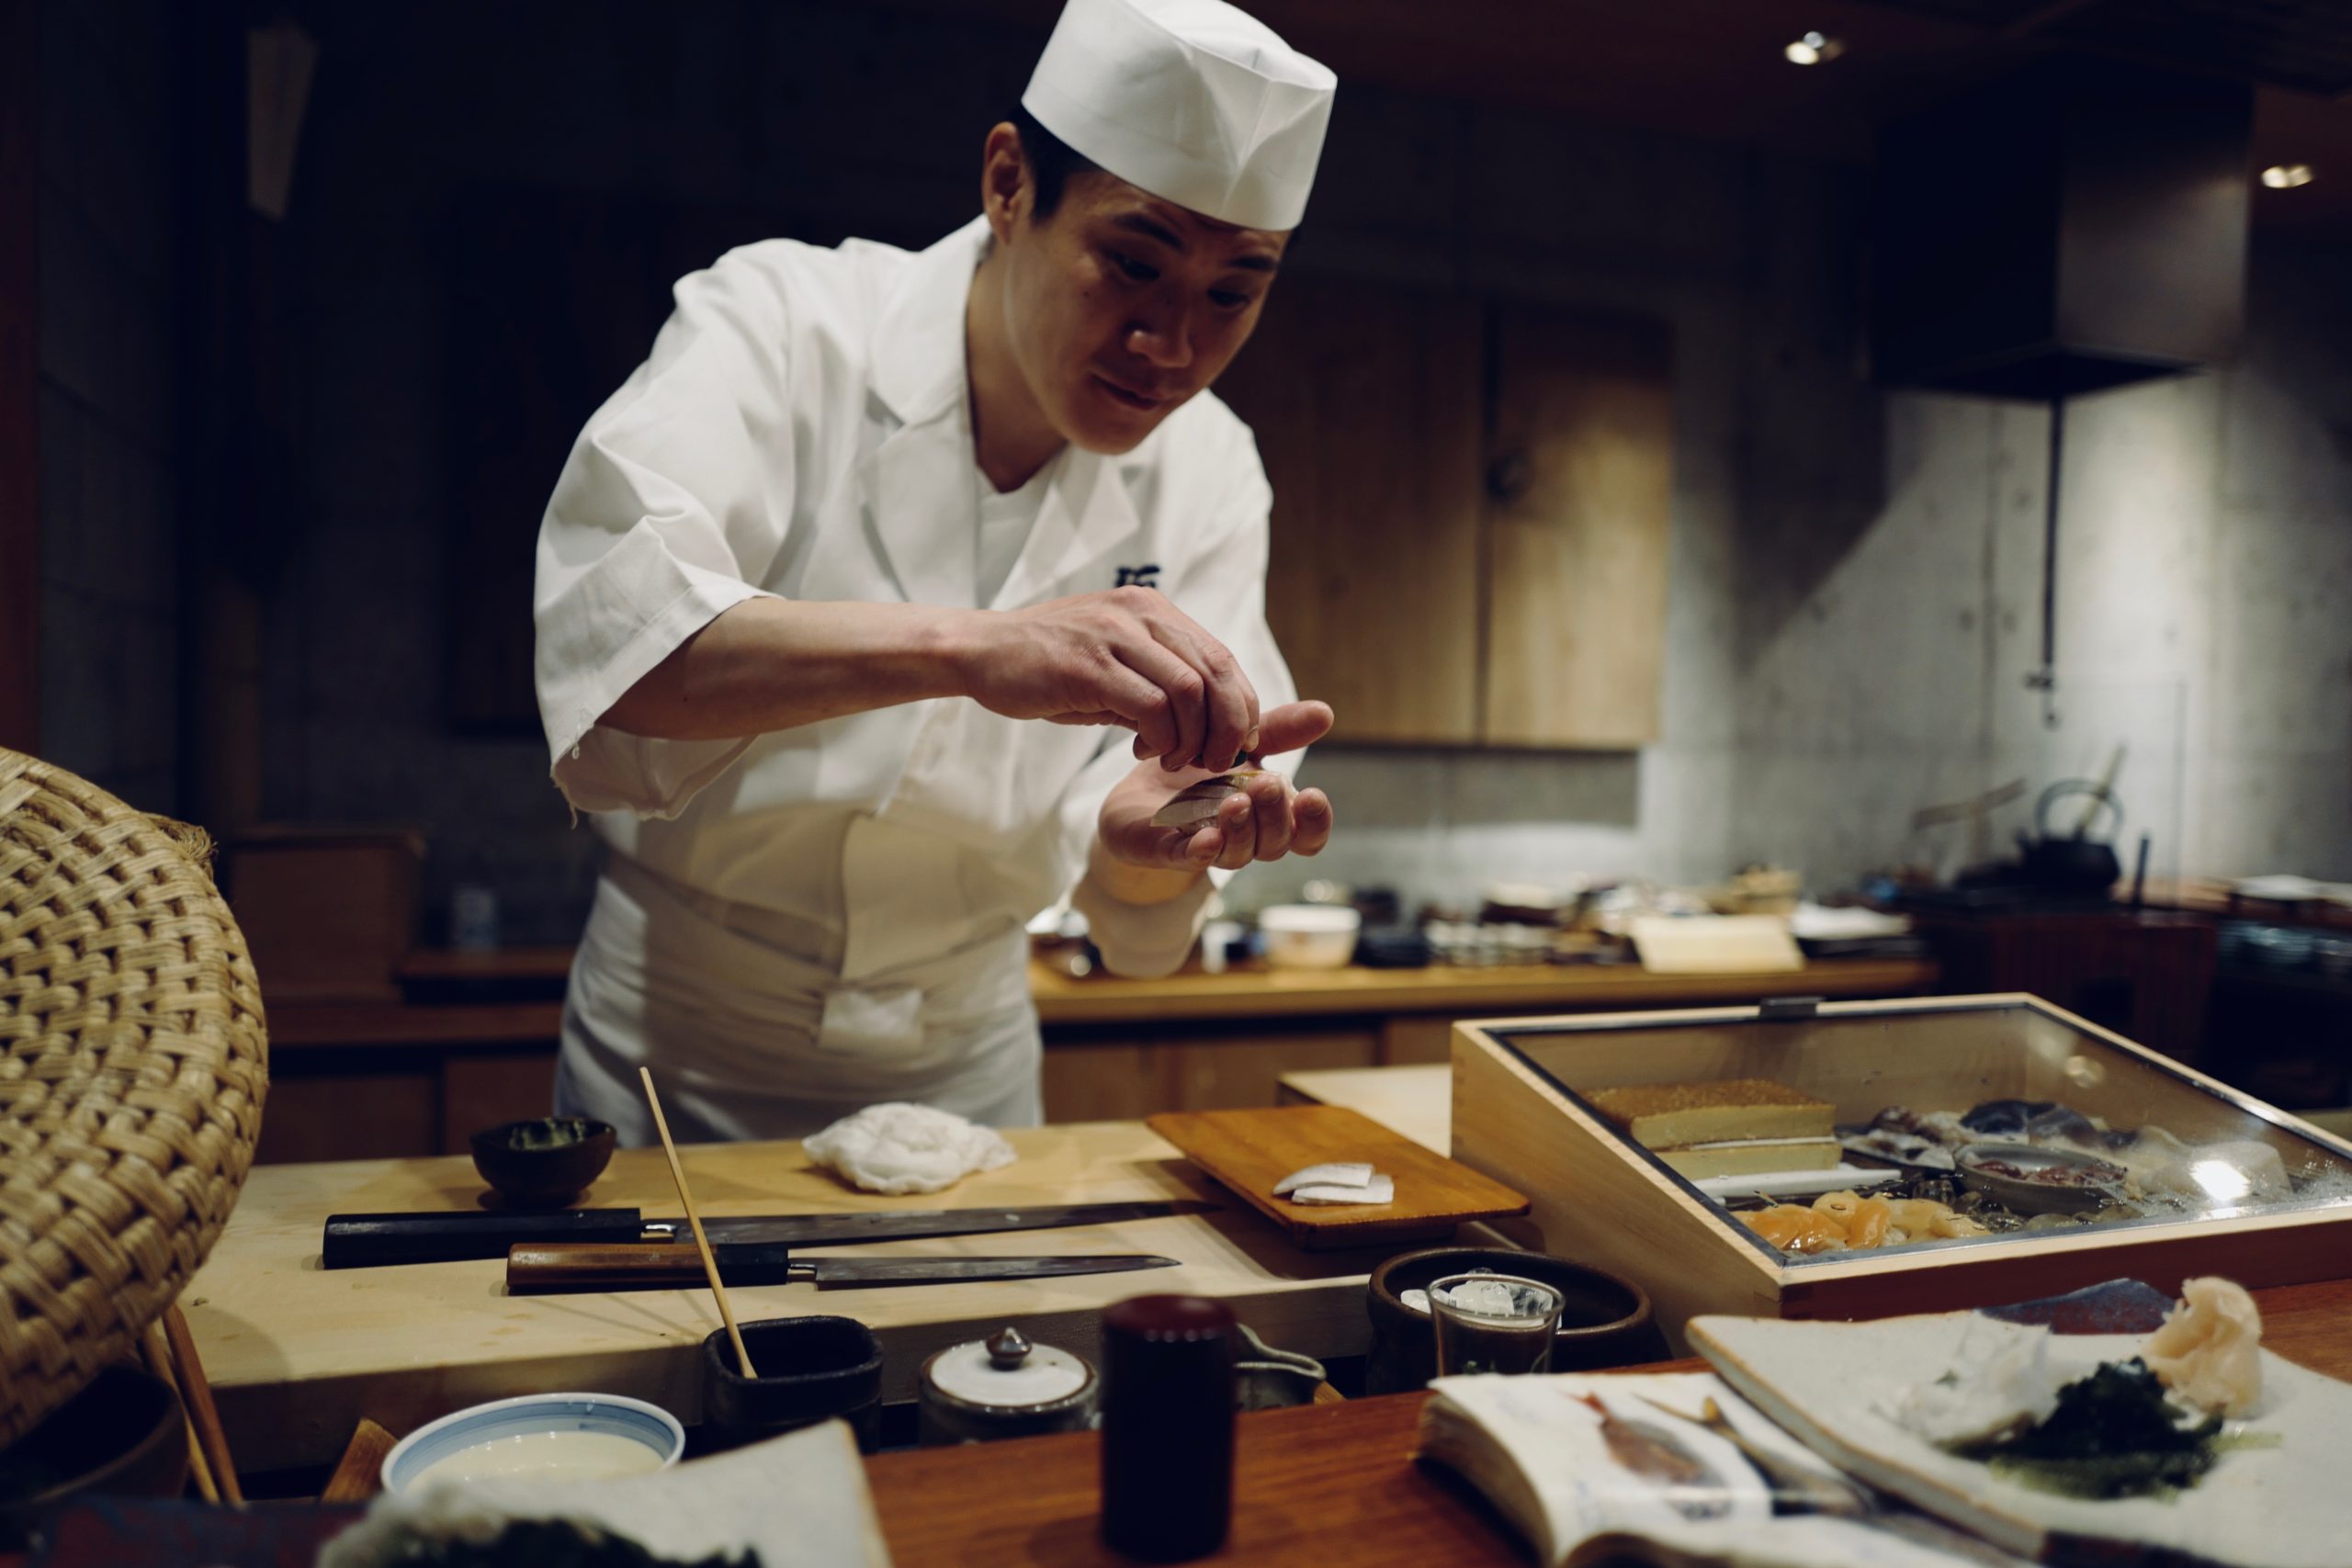 Experience cultural immersion in Japan like no other during our cooking class as part of our paid teaching program in Japan